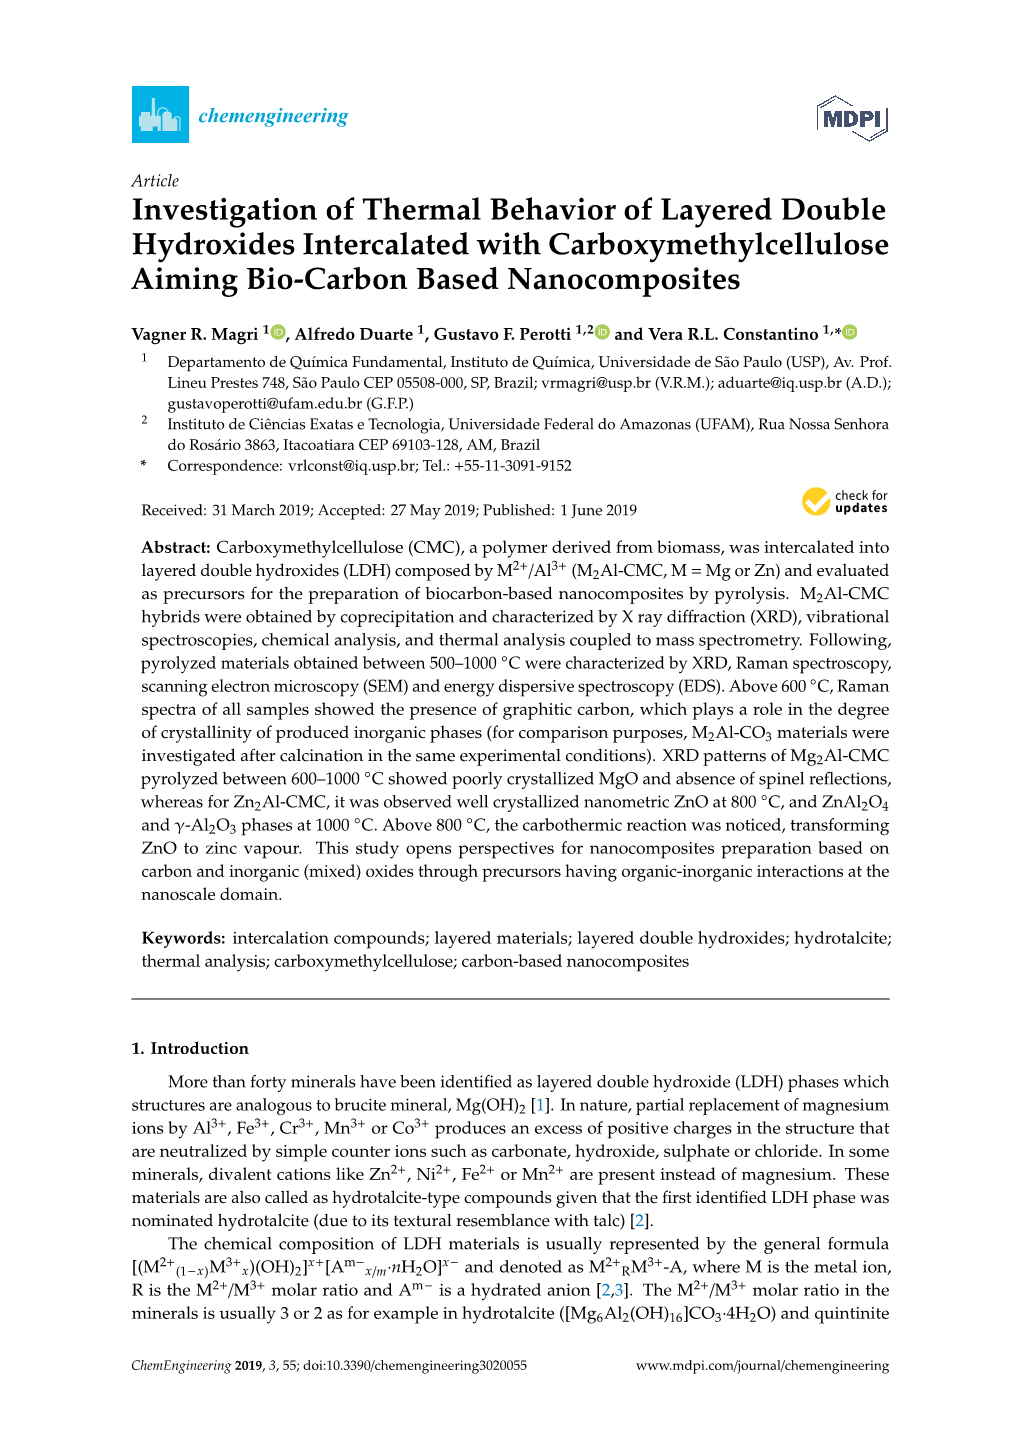 Investigation of Thermal Behavior of Layered Double Hydroxides Intercalated with Carboxymethylcellulose Aiming Bio-Carbon Based Nanocomposites